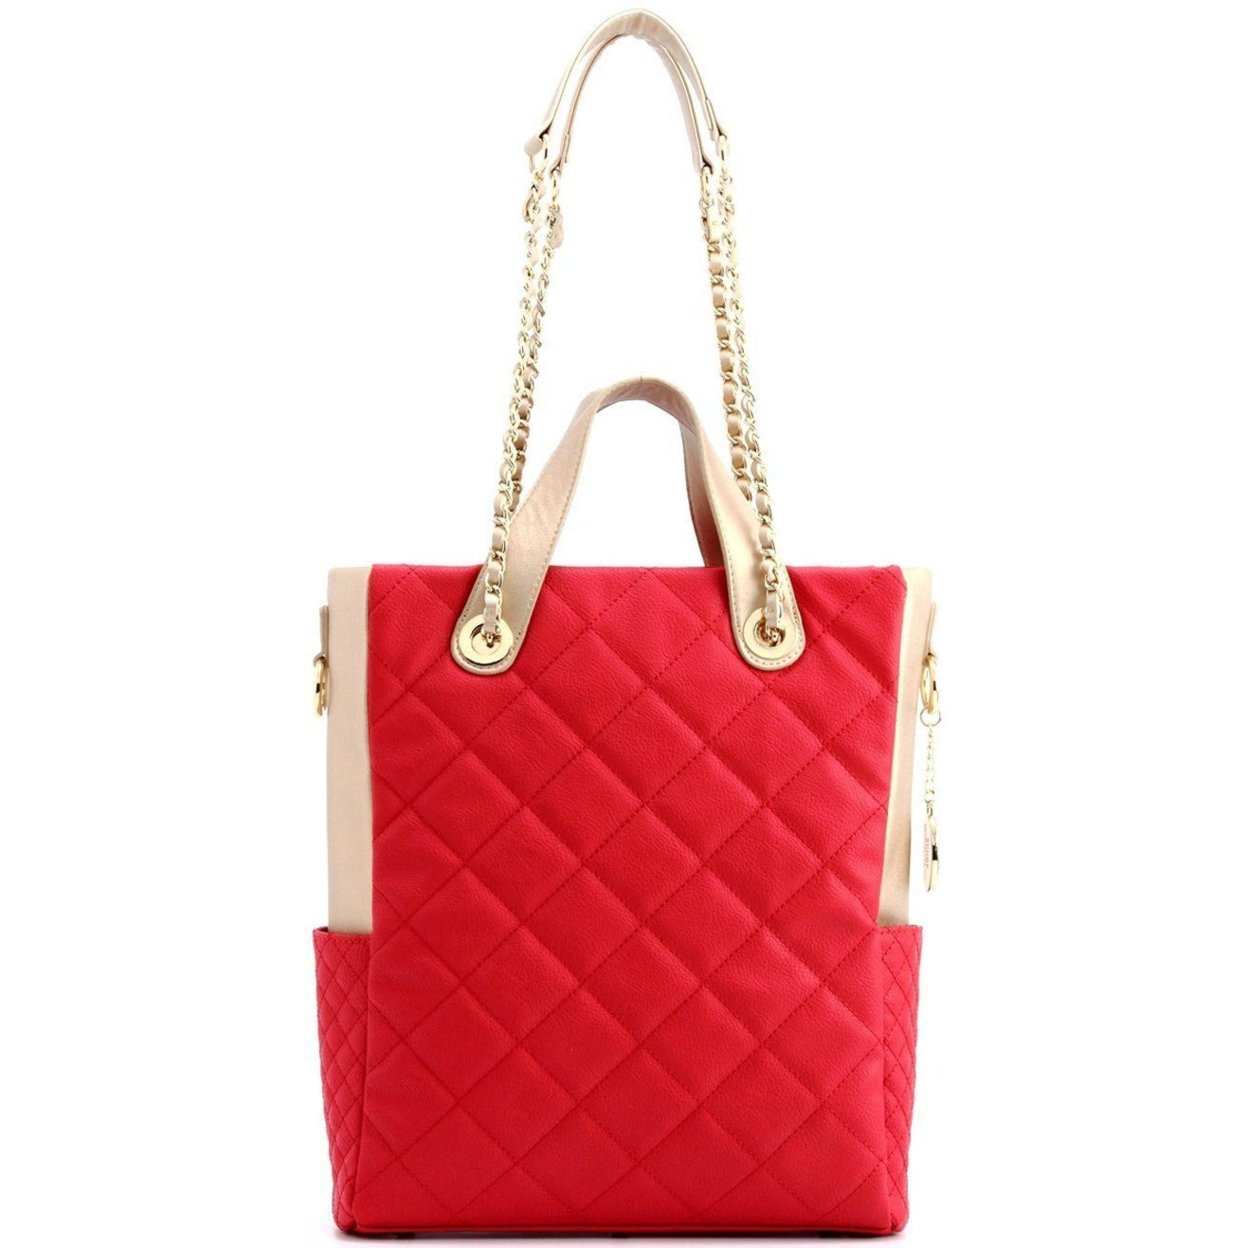 SCORE!'s Kat Travel Tote For Business, Work, Or School Quilted Shoulder Bag Red & Gold